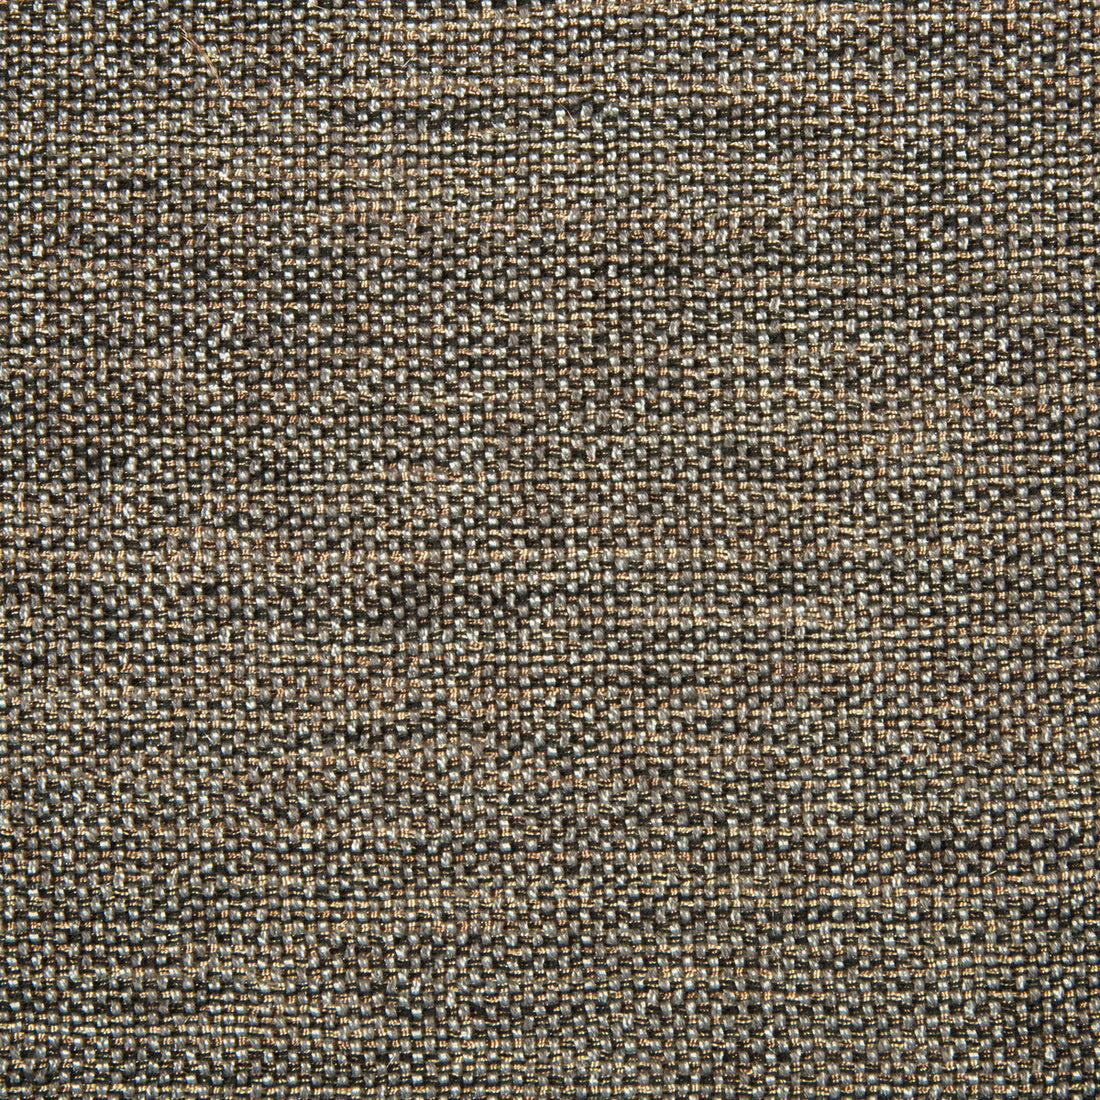 Kravet Contract fabric in 4458-8 color - pattern 4458.8.0 - by Kravet Contract